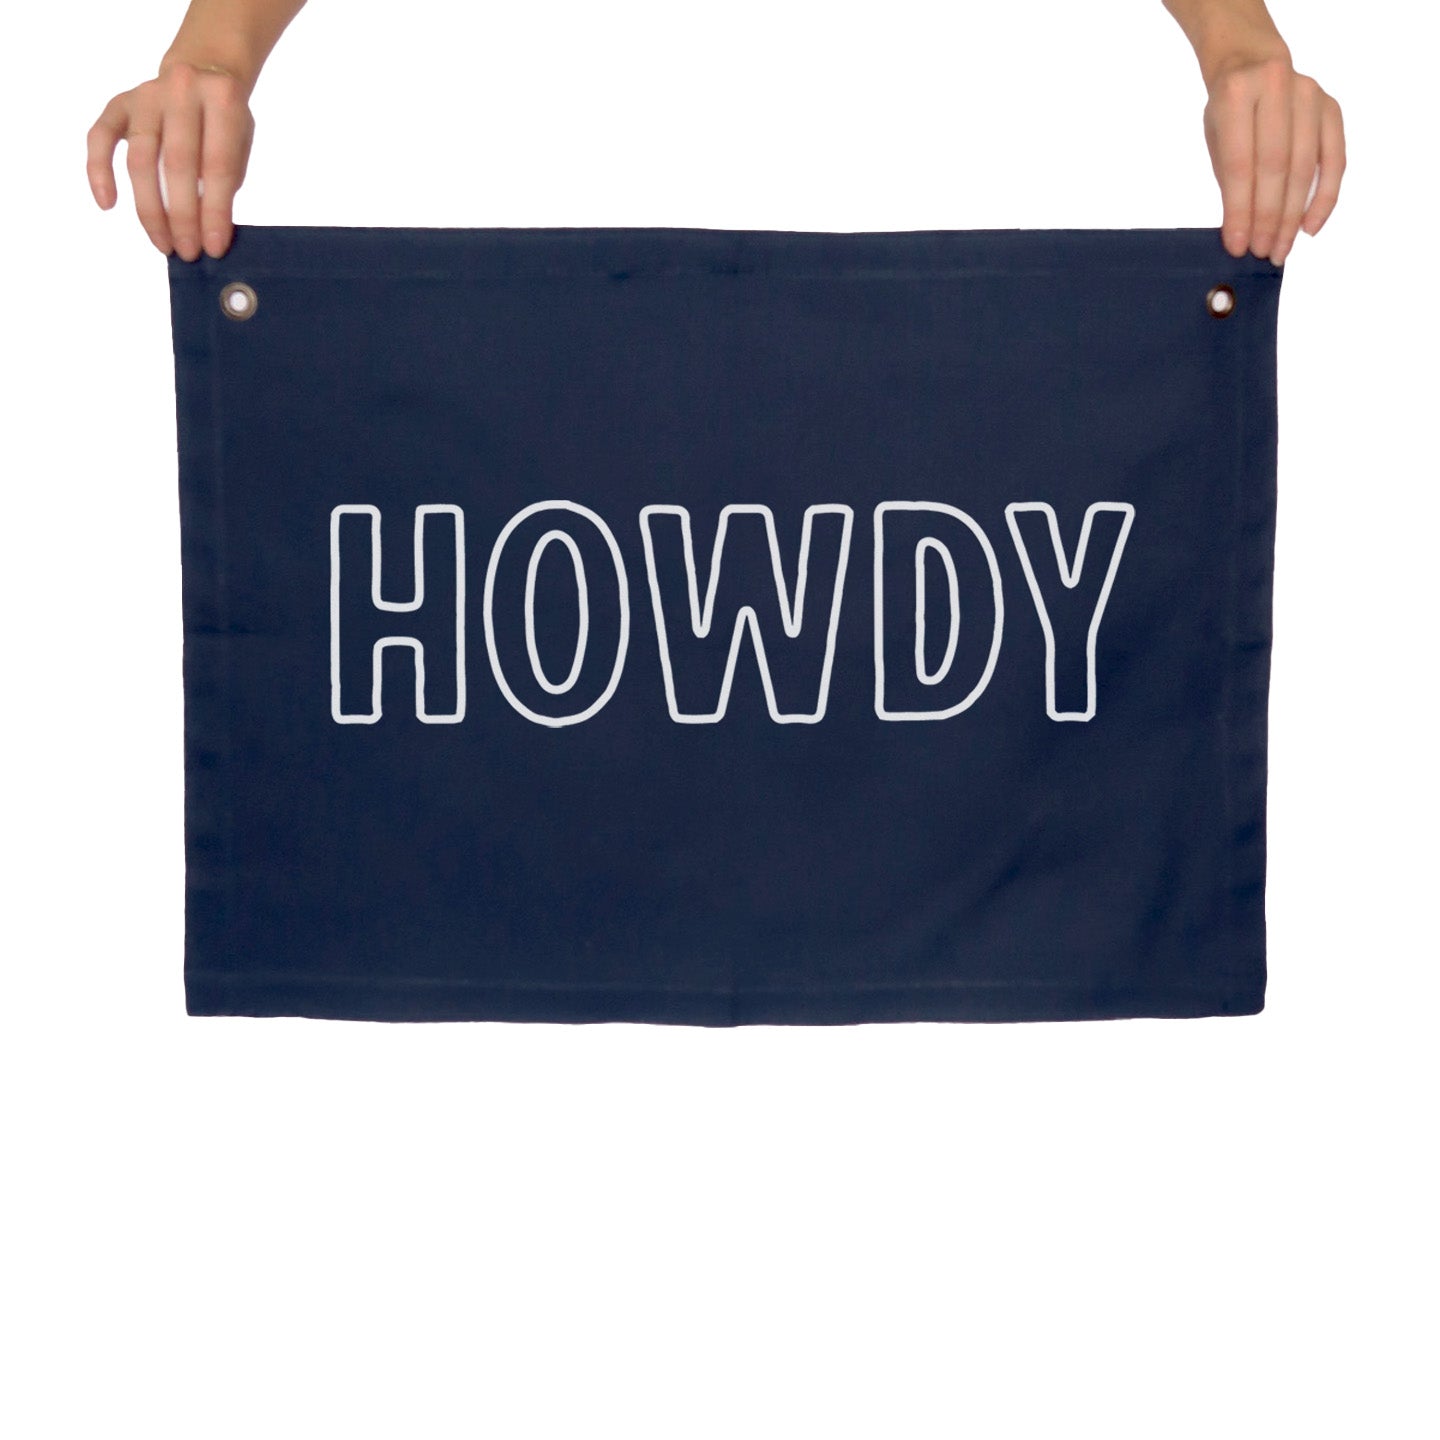 Howdy Outline Large Canvas Flag